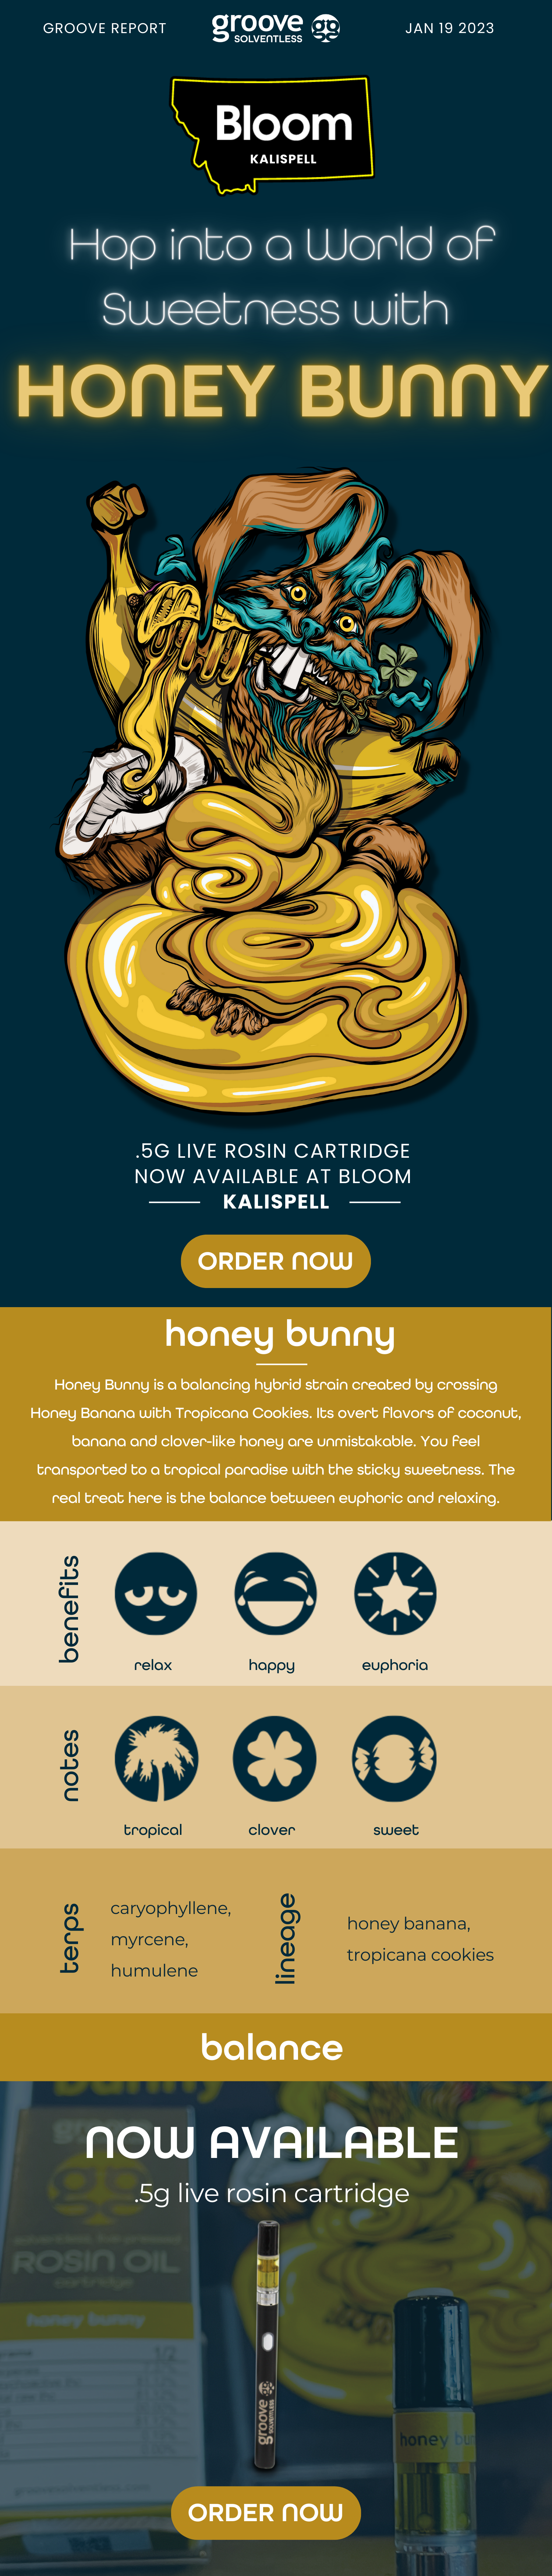 Honey Bunny Cartridge Now Available at Bloom Kalispell